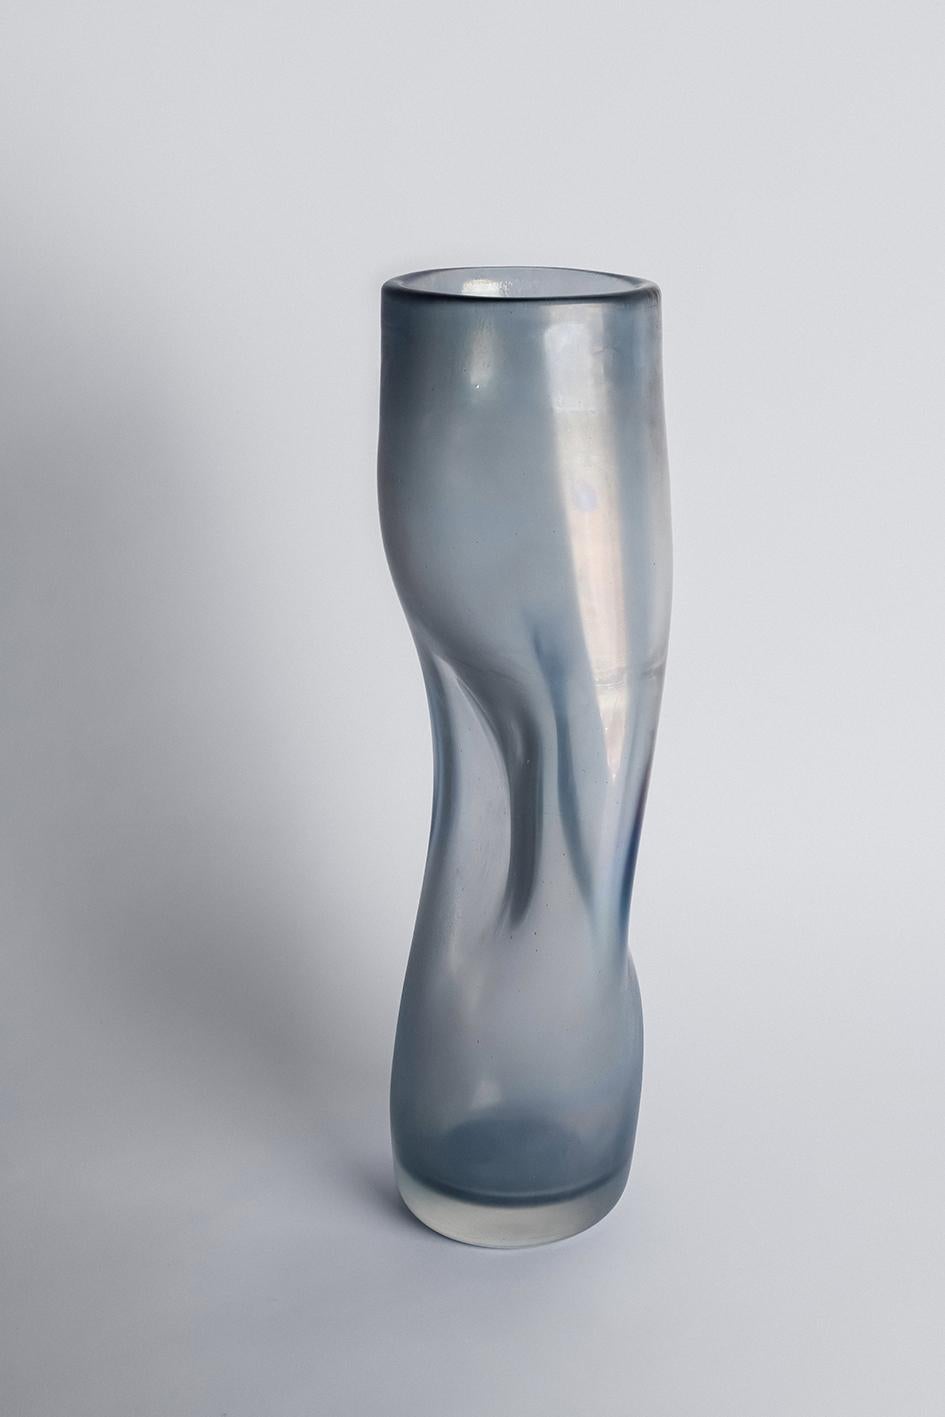 Rio is a vase from the Laguna Collection designed by Ludovica+Roberto Palomba for Purho in spring 2022.
Slender, sinuous, apparently imperfect, Rio was conceived starting from a cylindrical shape whit a central section modeled to convey the idea of